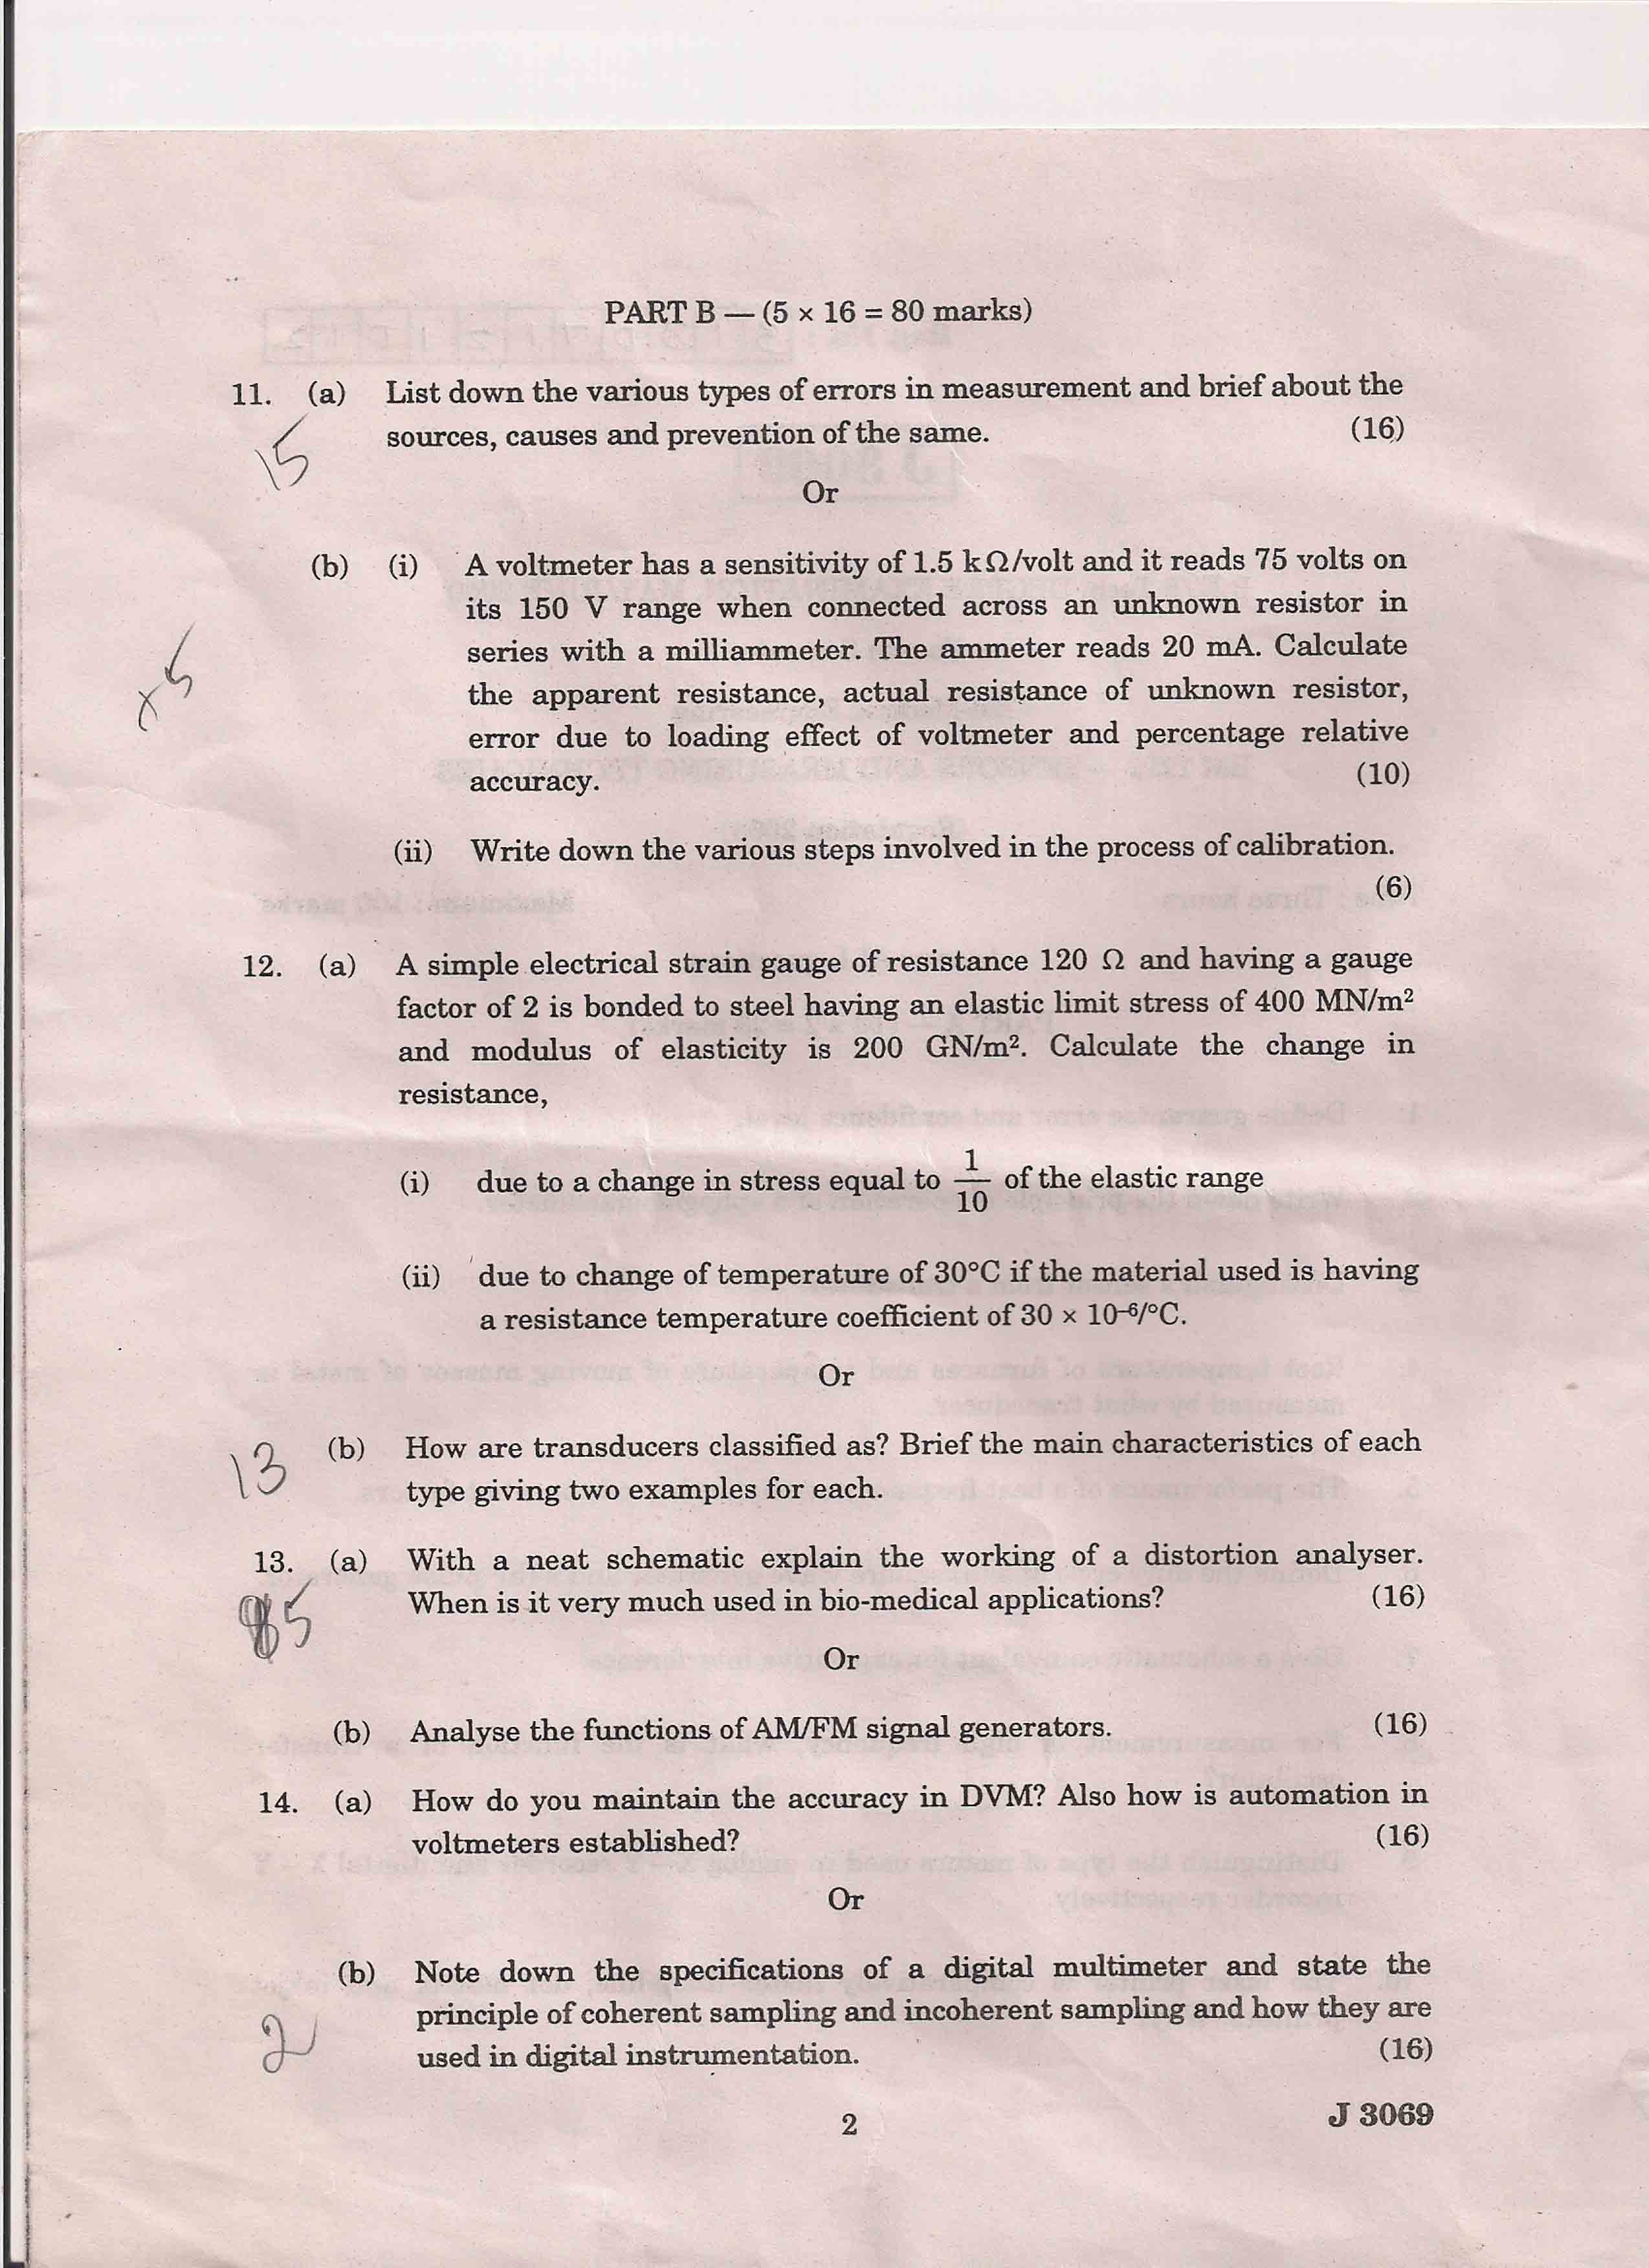 ... , MAY/JUNE 2009 Anna University Chennai Question paper for BME